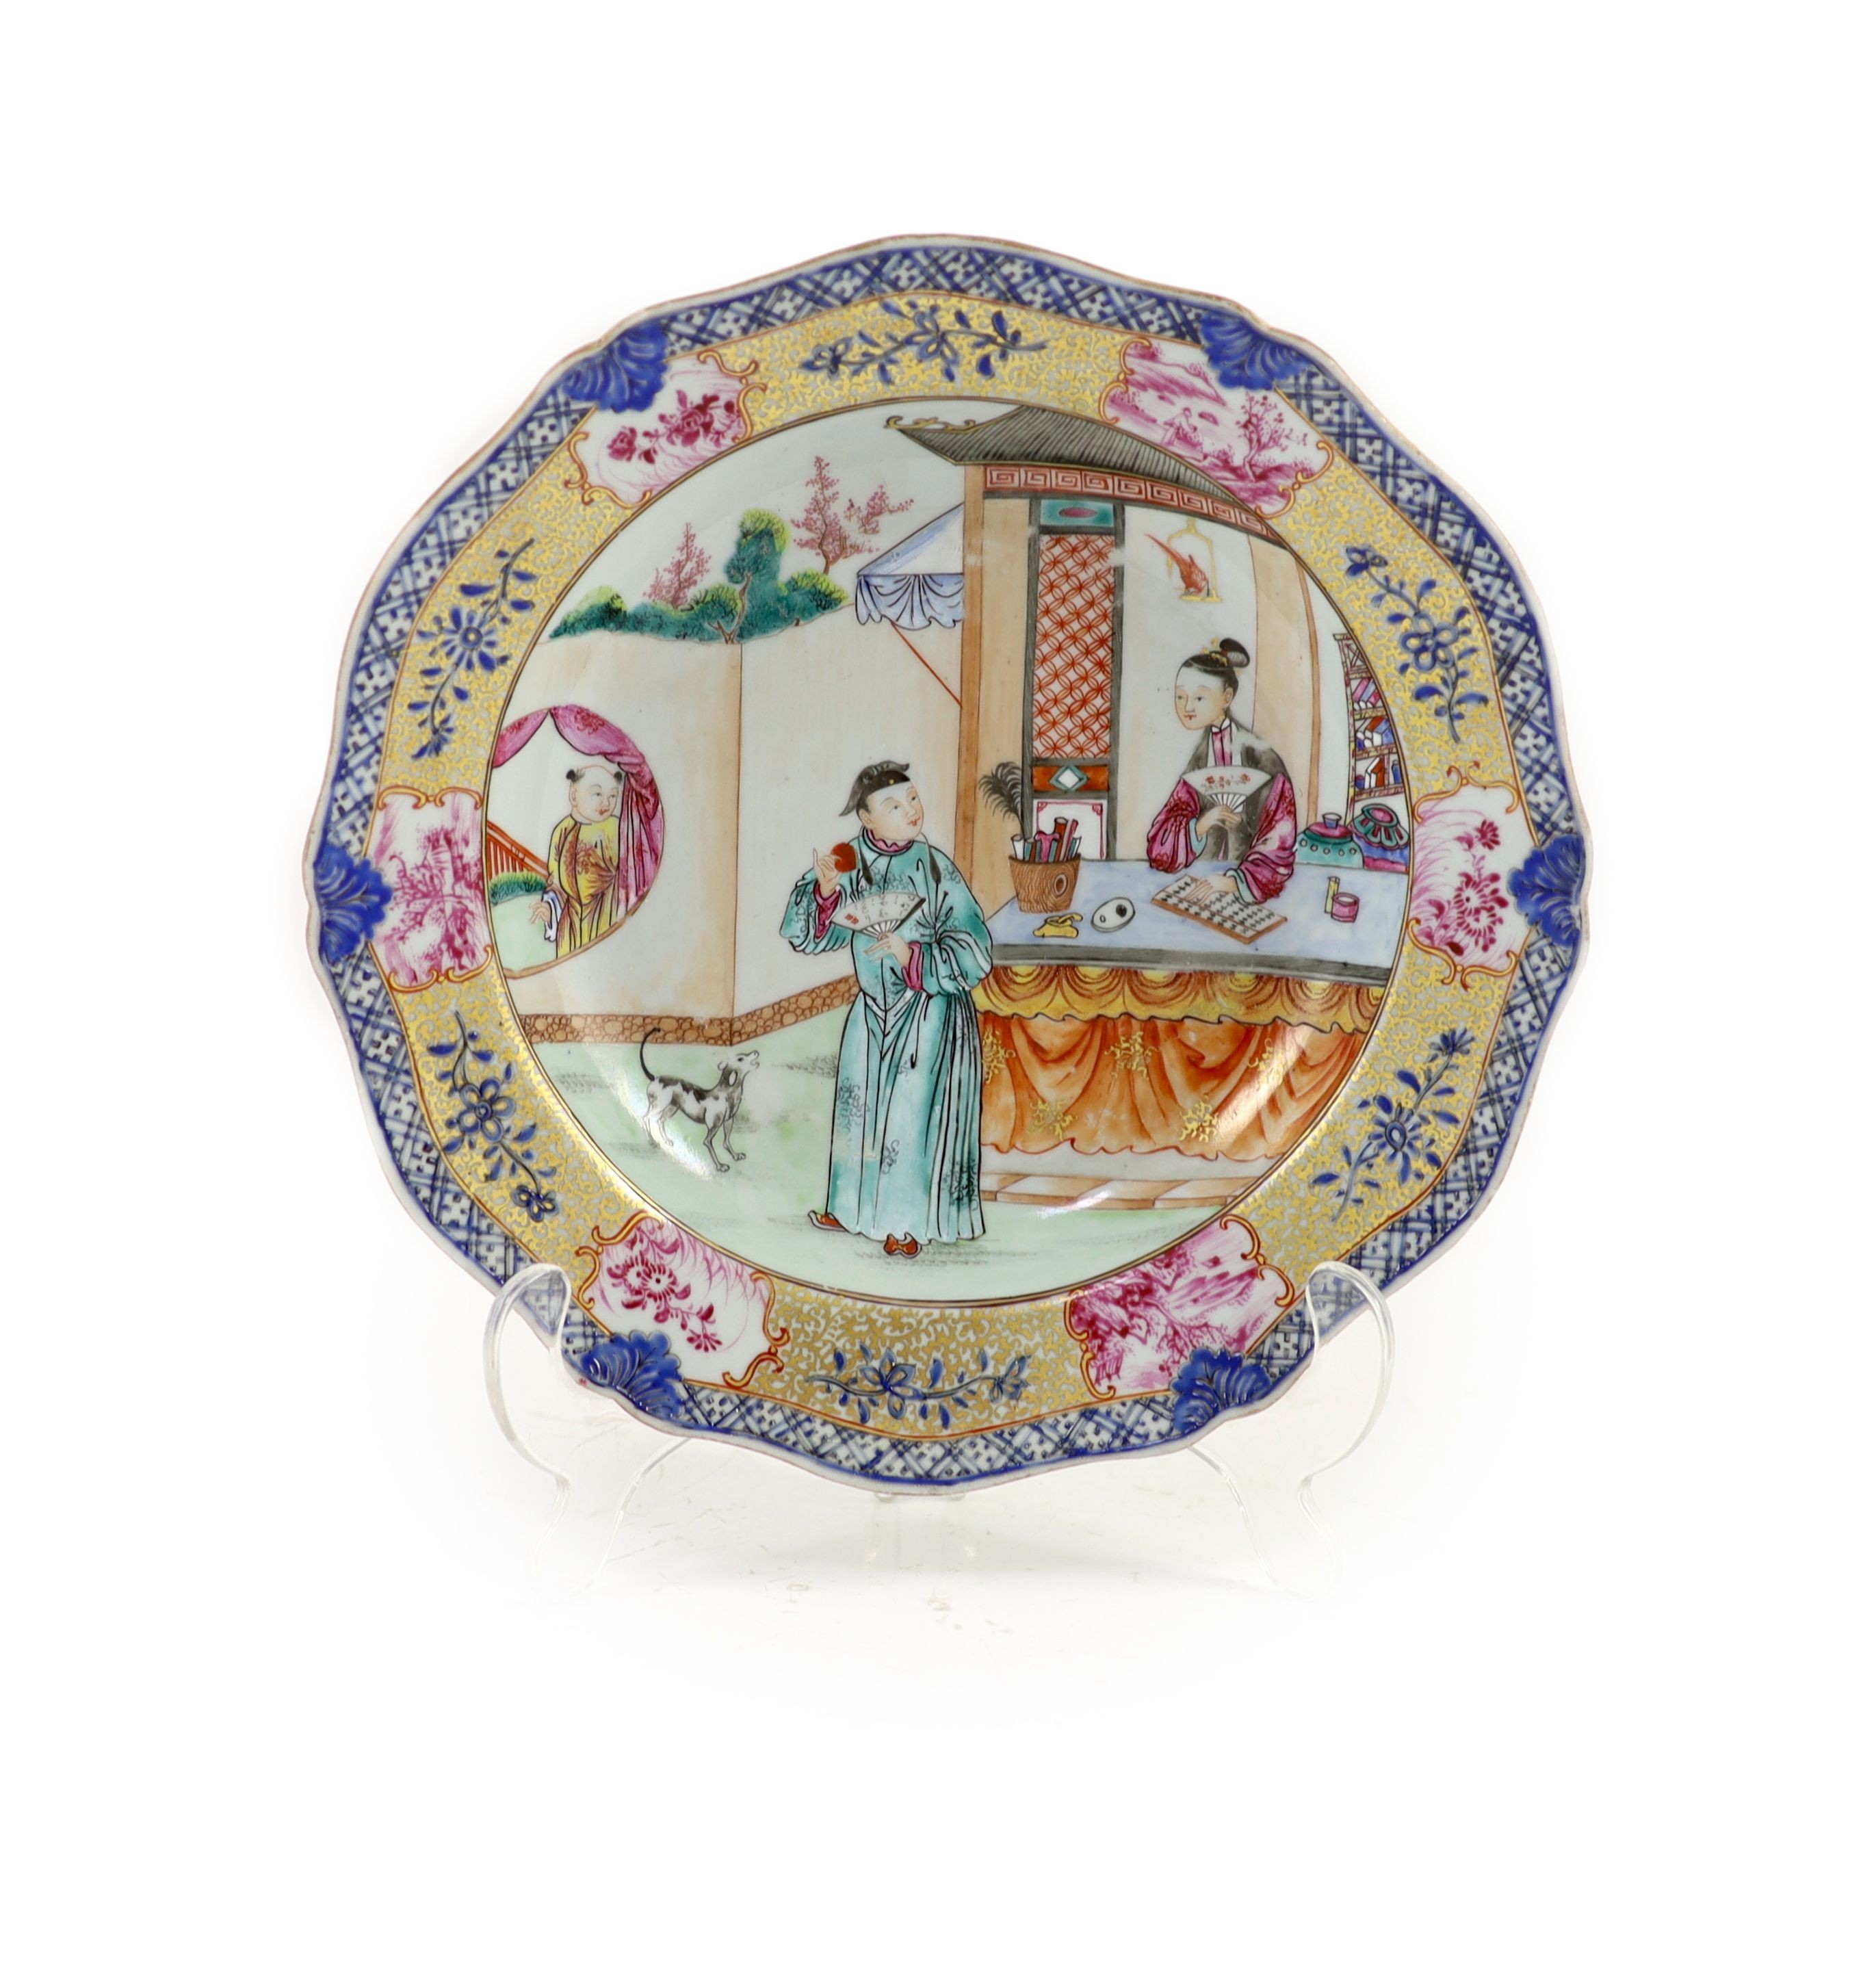 A Chinese export famille rose plate, Qianlong period, 22.5 cm diameter